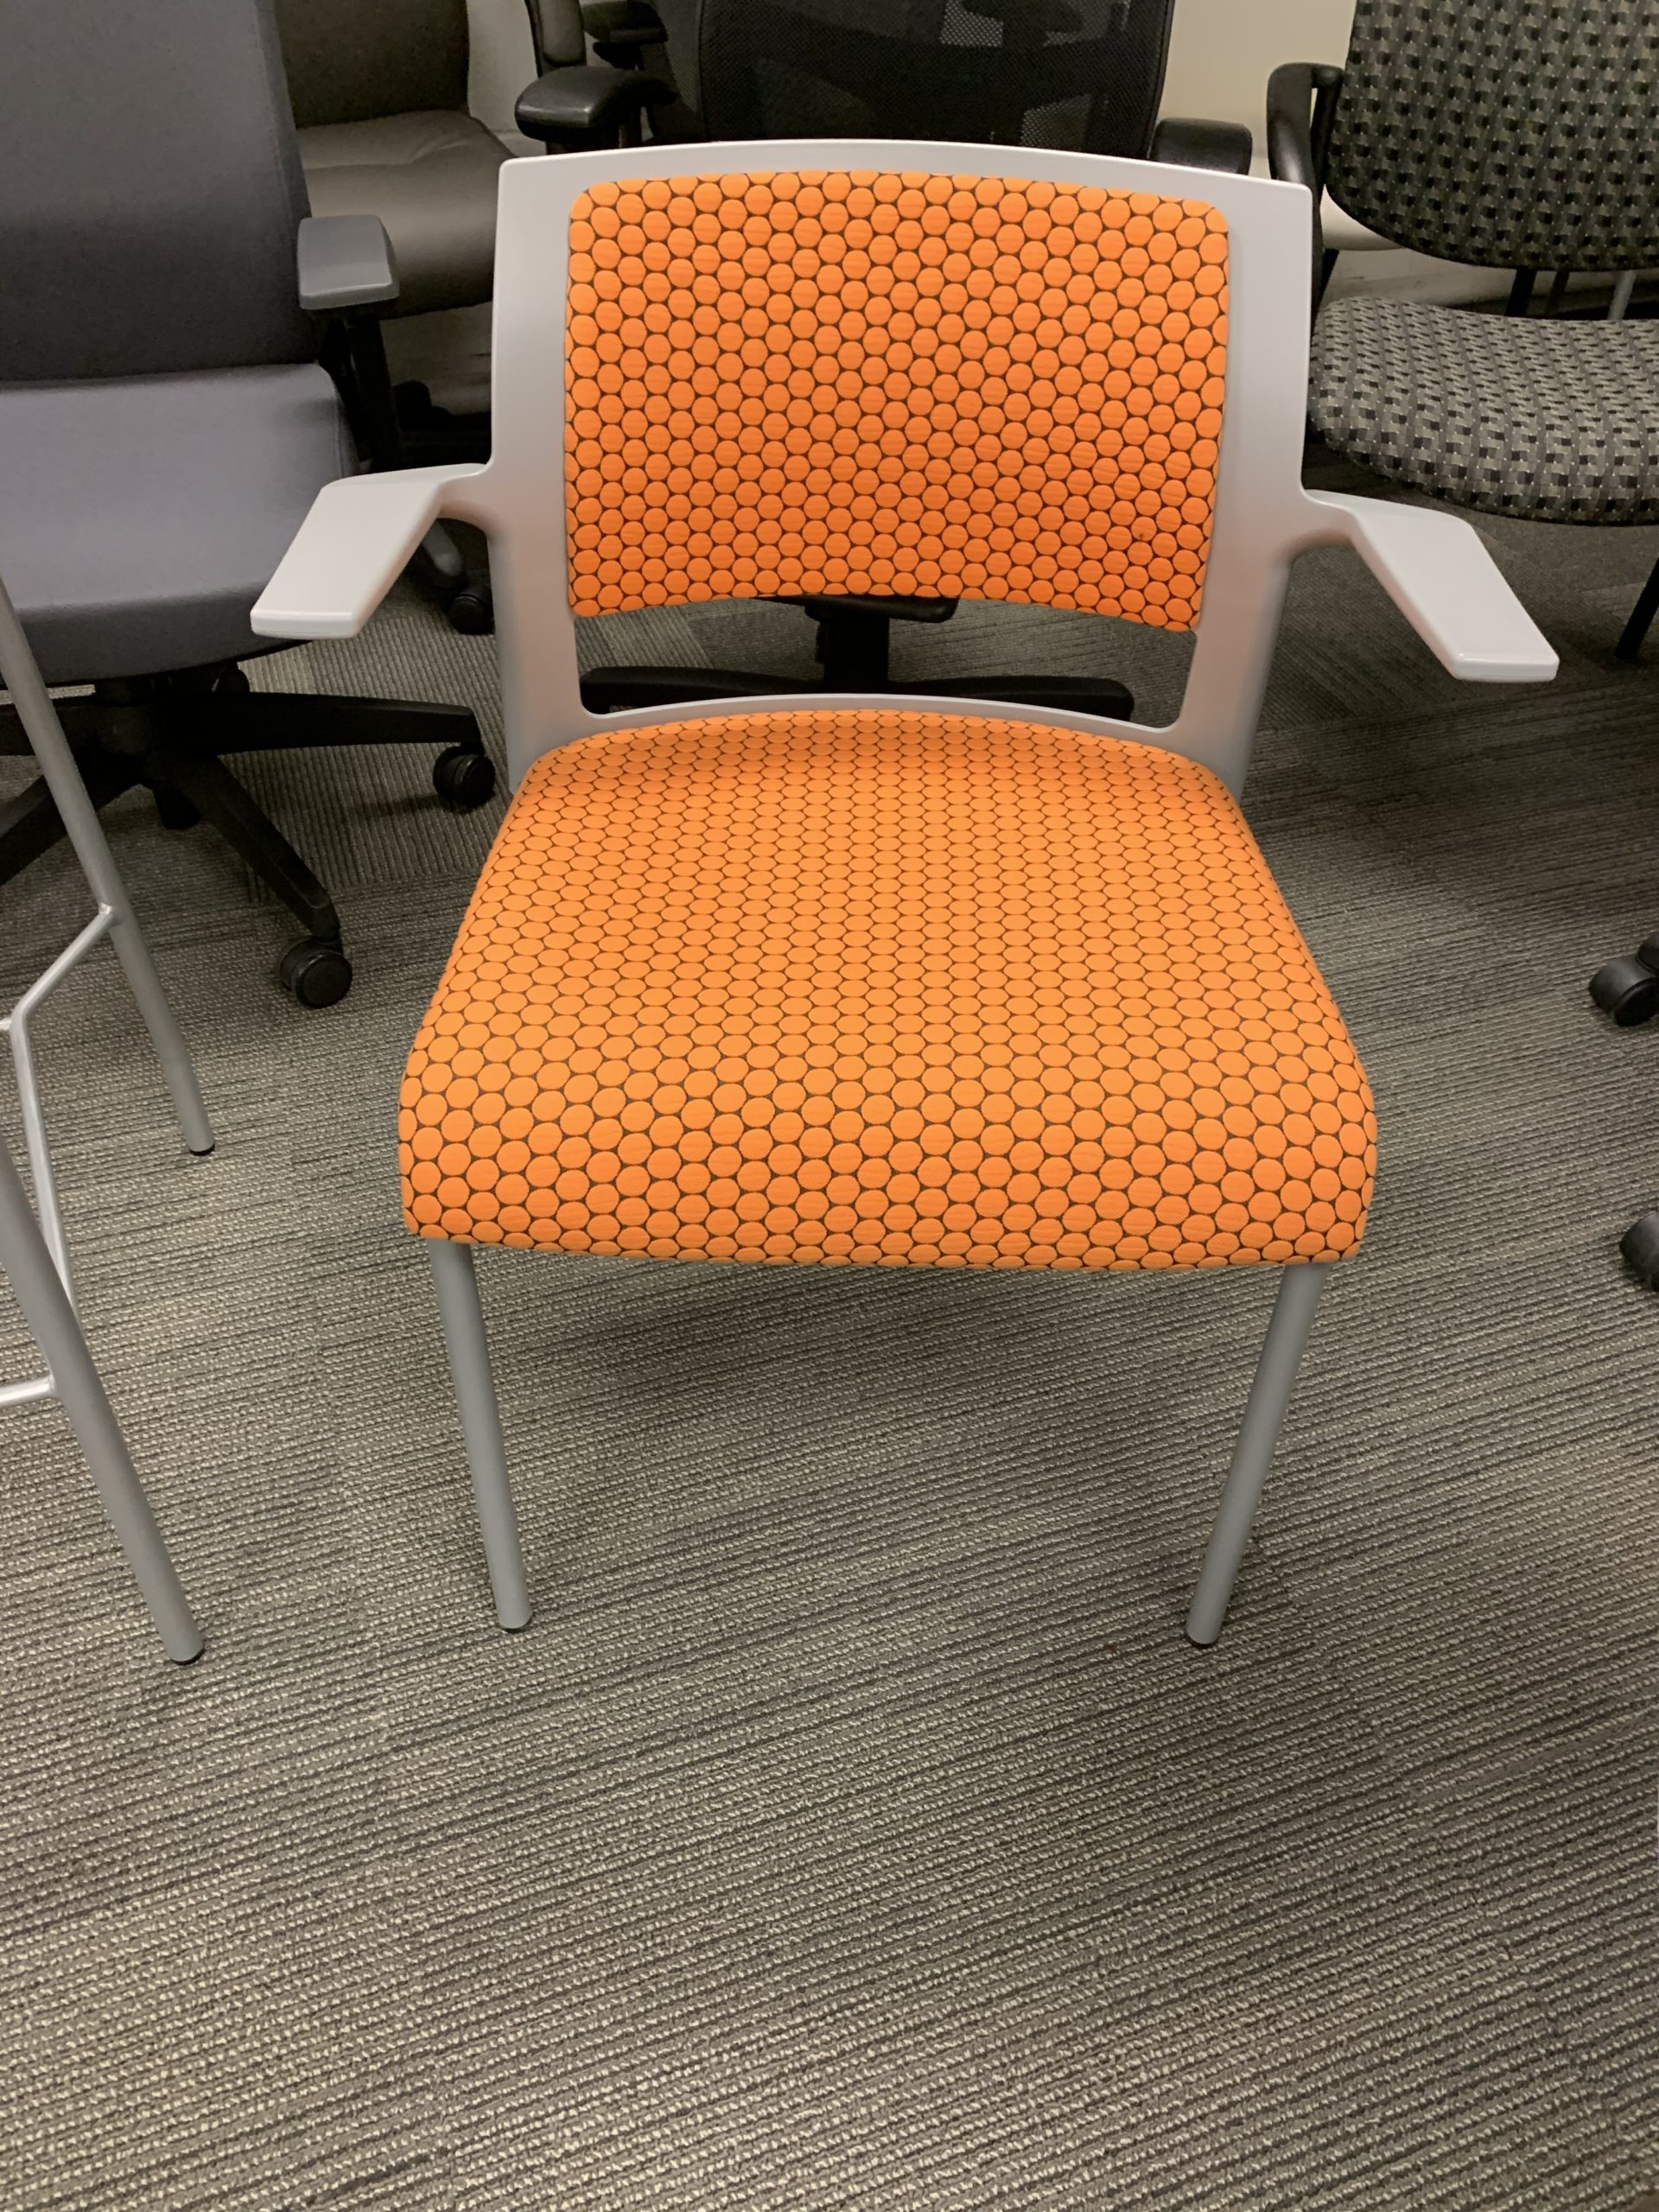 Steelcase Guest Chair Image